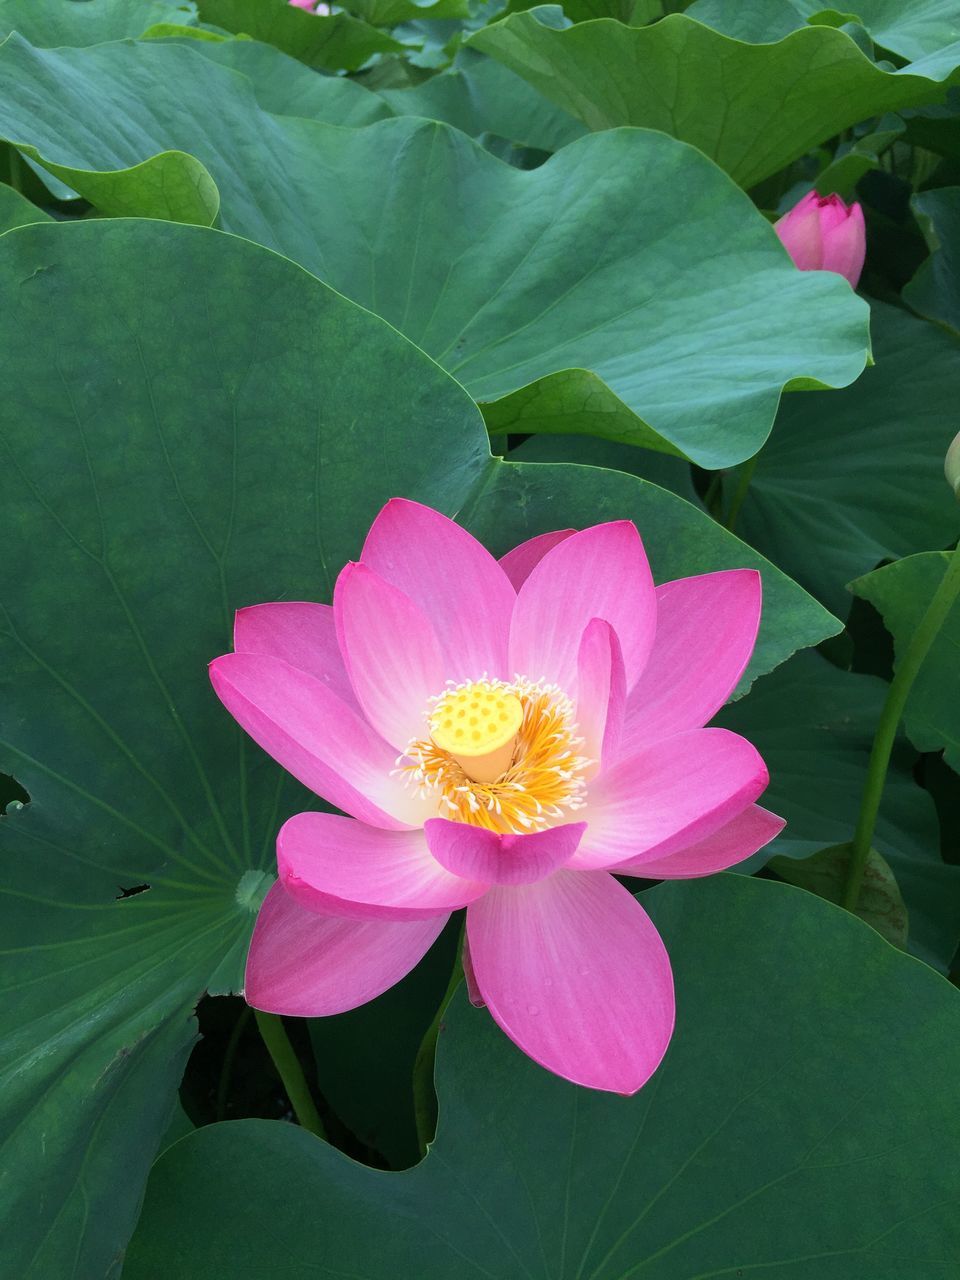 flower, petal, freshness, flower head, fragility, pink color, beauty in nature, single flower, growth, leaf, pollen, blooming, water lily, close-up, nature, plant, high angle view, in bloom, stamen, pond